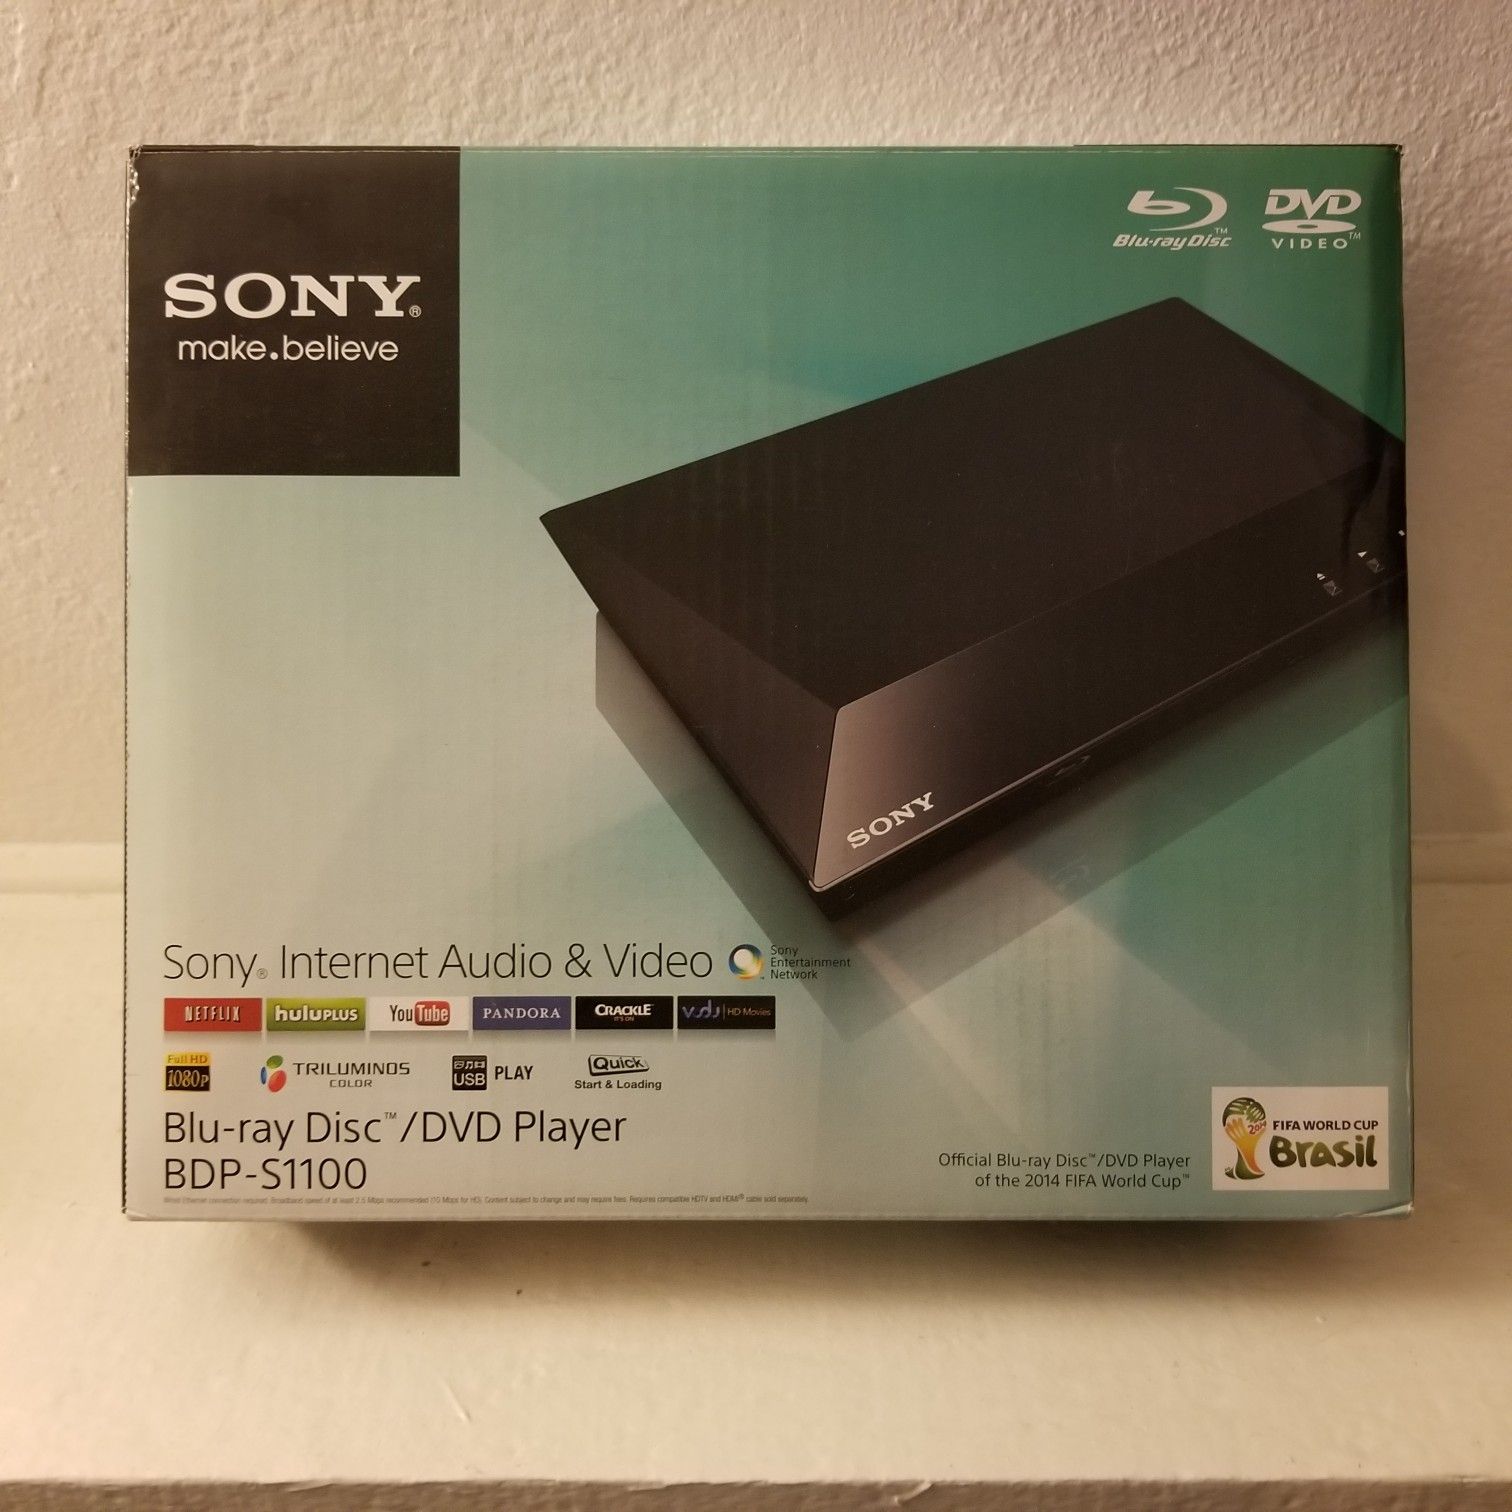 Sony Blue-ray Disc /DVD Player. BDP-S1100